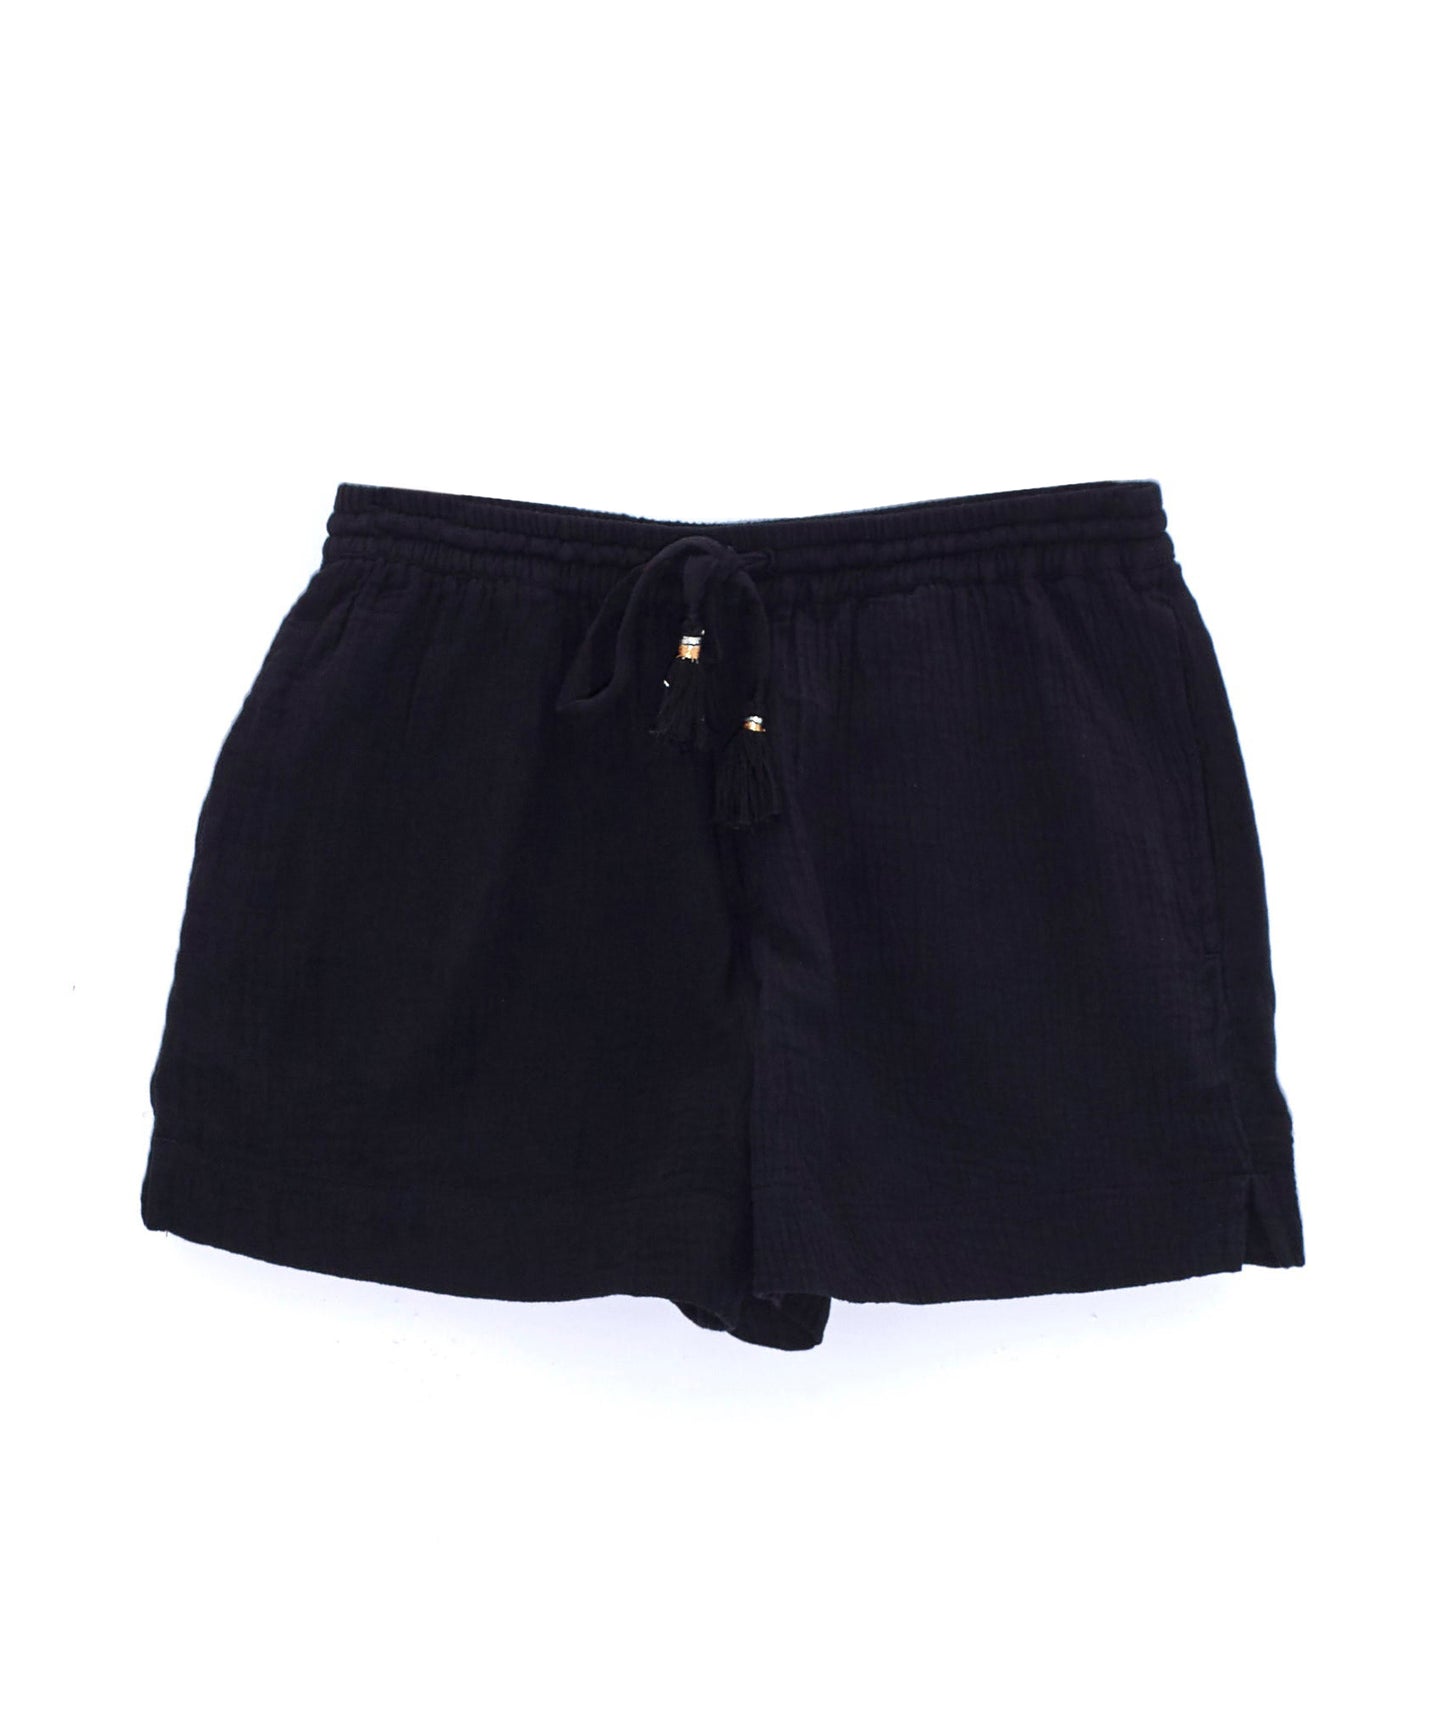 Supersoft Gauze Beach Shorts in color Black